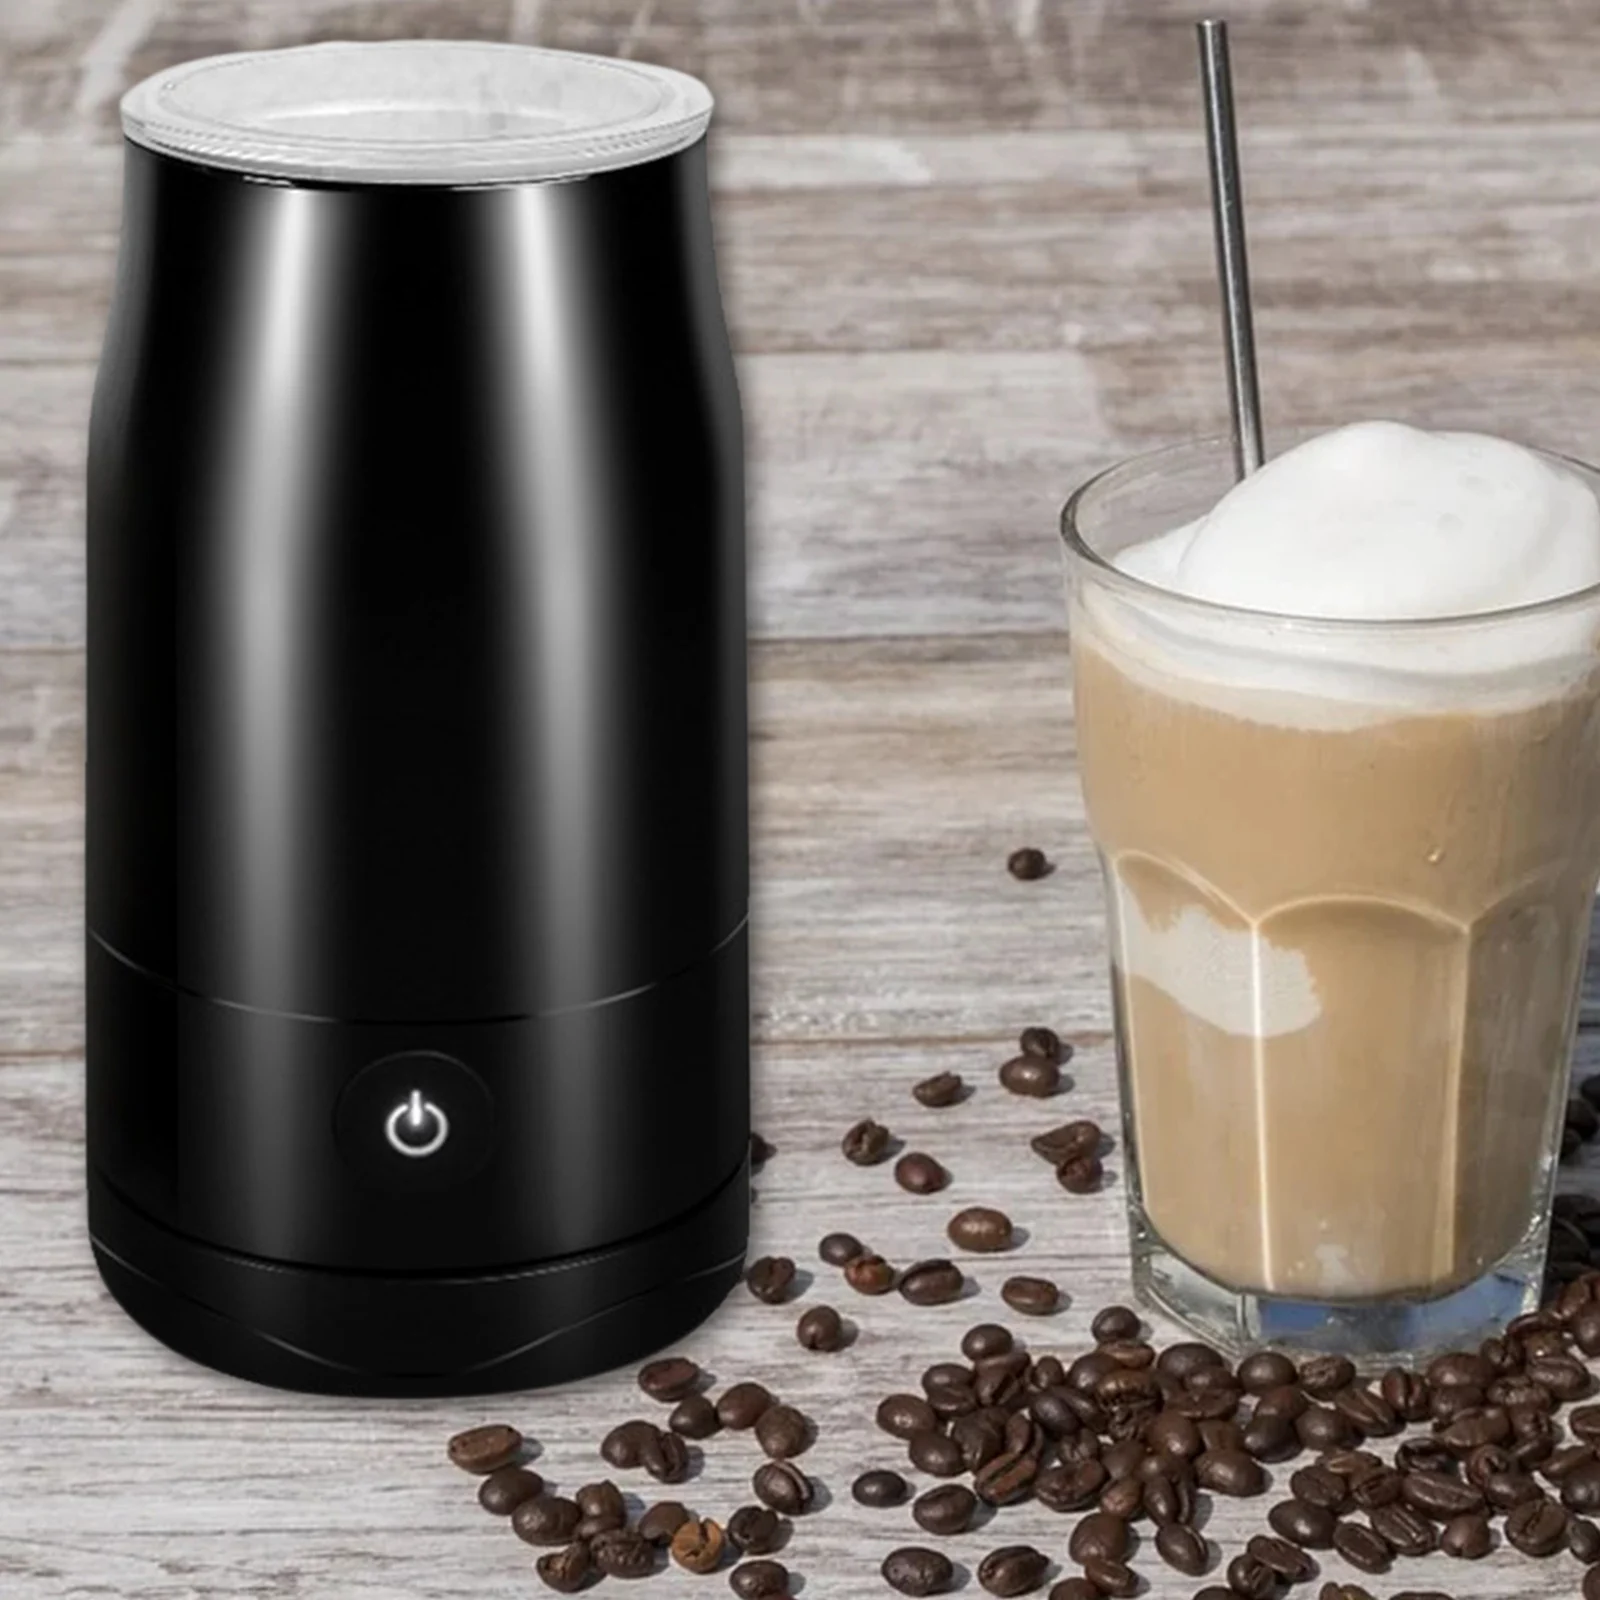 

550W Milk Frother 2 in 1 Hot and Cold Foam Maker Steamer 310ml for Cappuccino Coffee One Key Operate